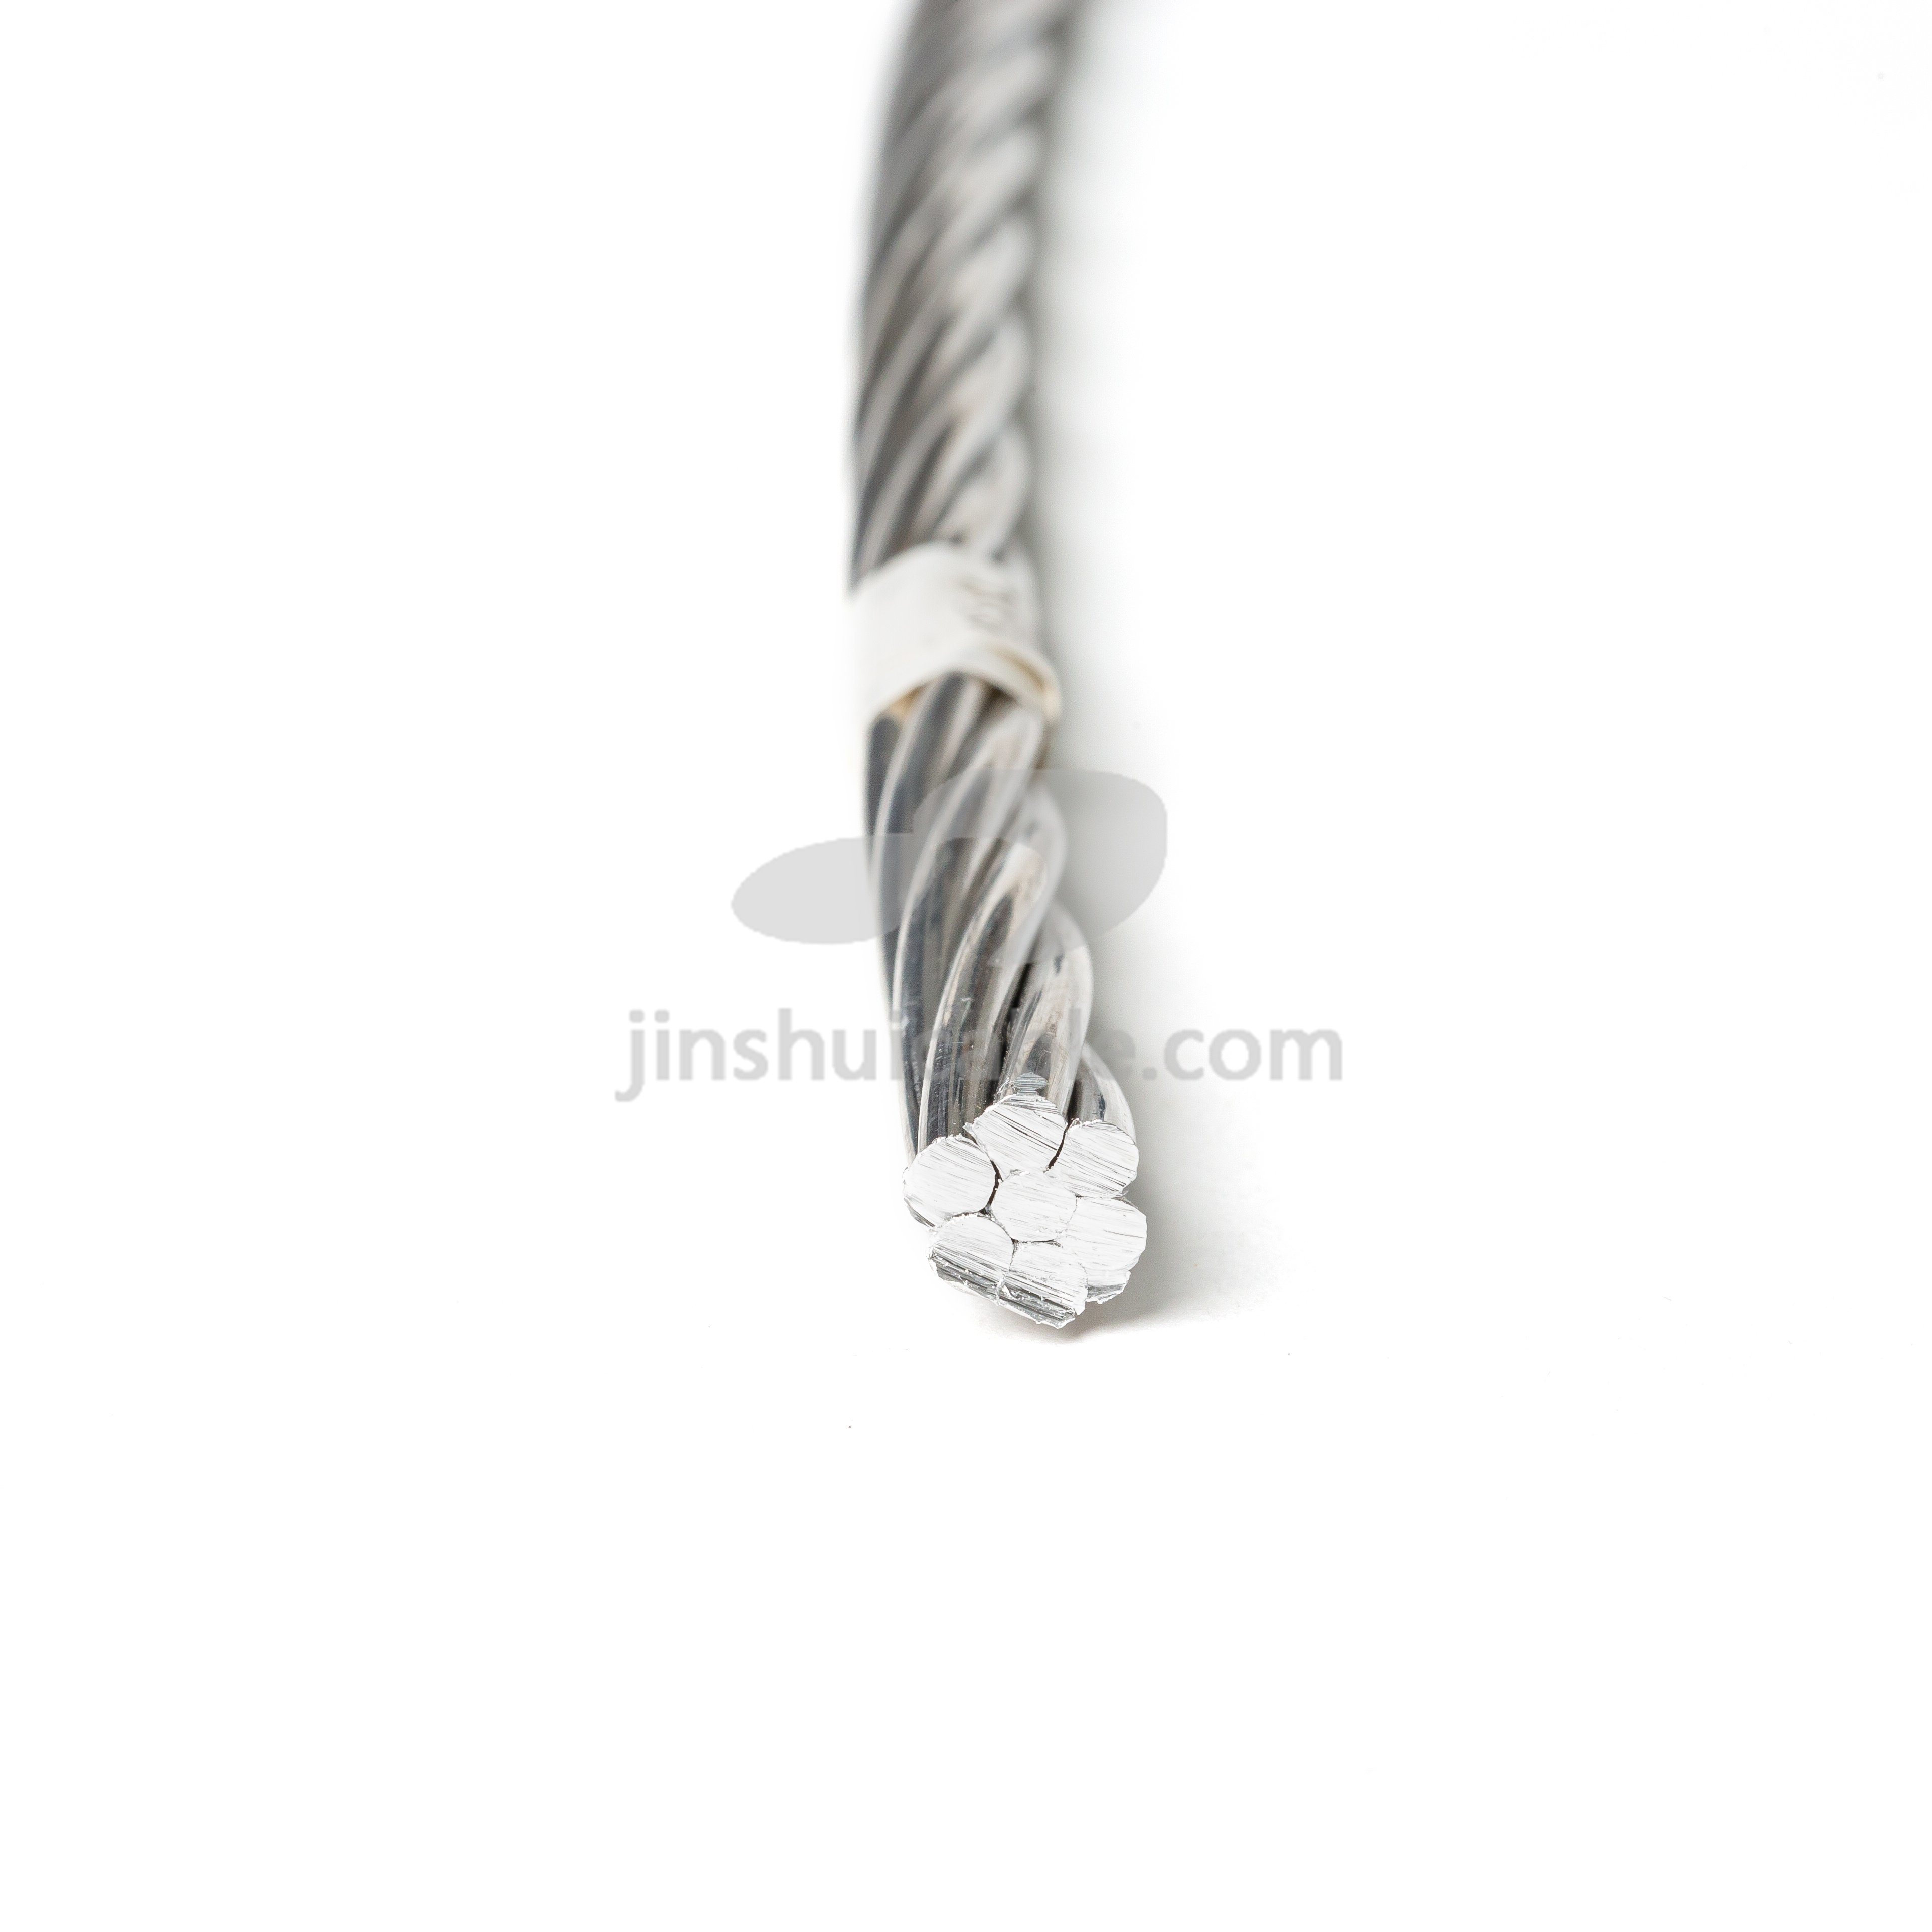 ACSR Conductor Aluminum Conductor Steel Reinforced Overhead Bare Electric Cable Conductor